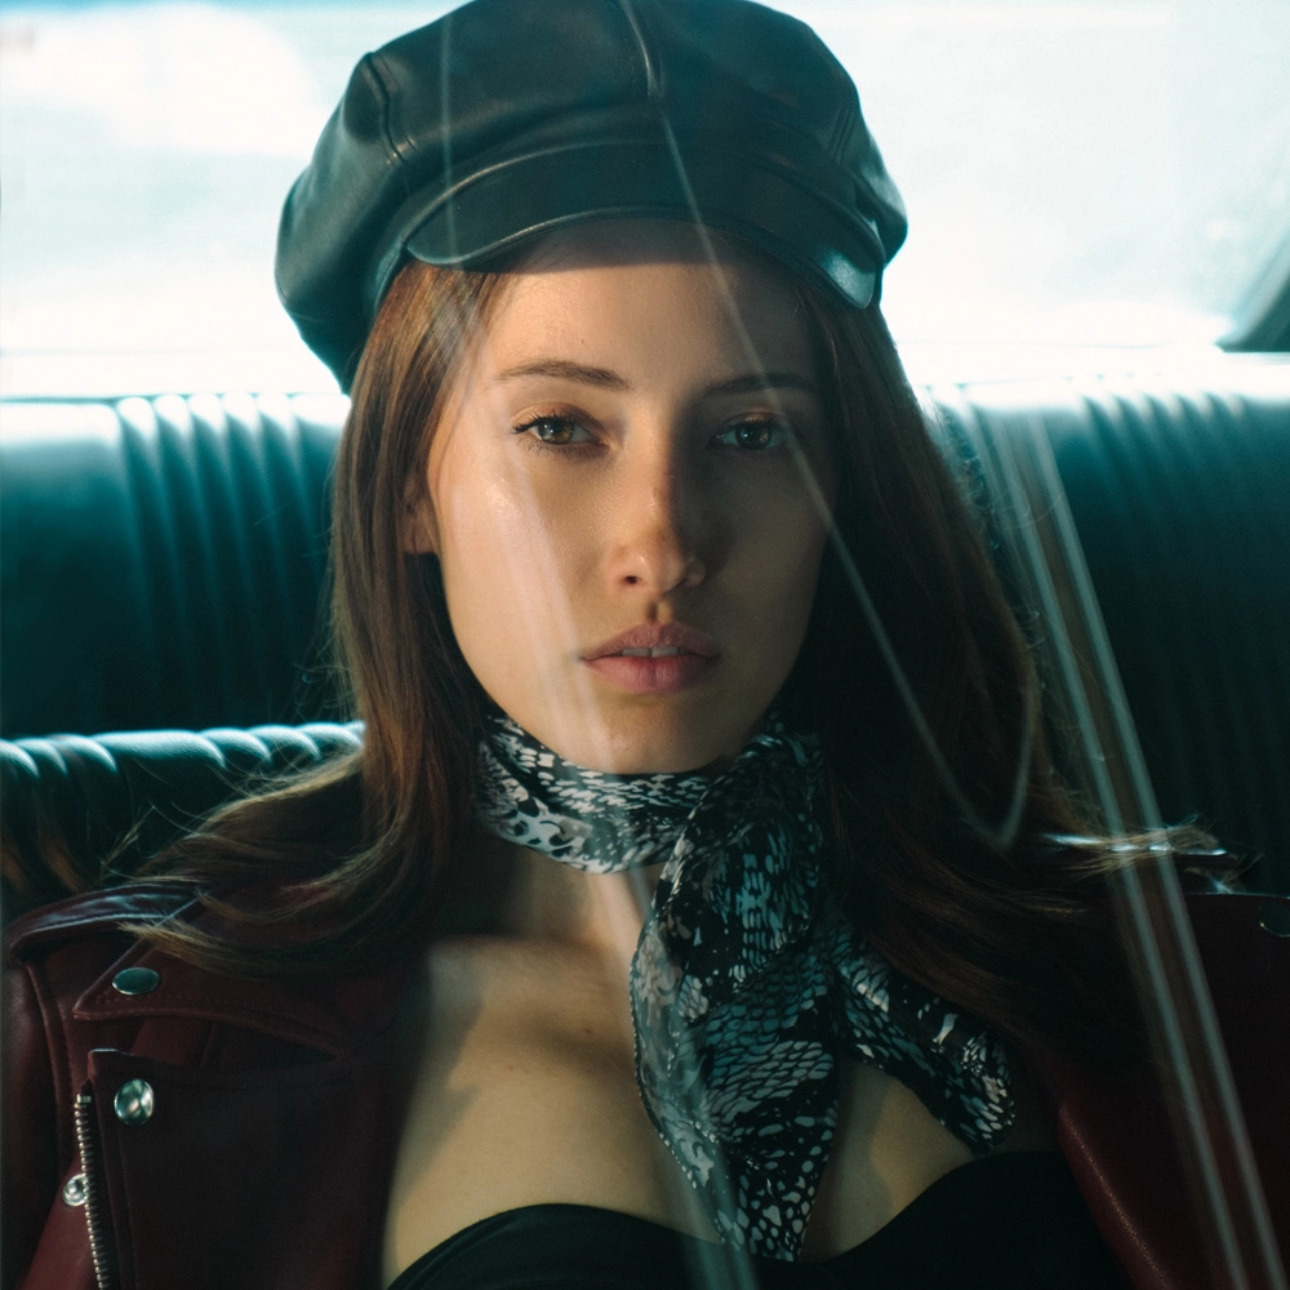 Stylish woman in a red leather jacket and black beret, accented with a patterned scarf, giving a contemplative gaze in a vintage setting with soft lighting — A Los Angeles photography studio portfolio